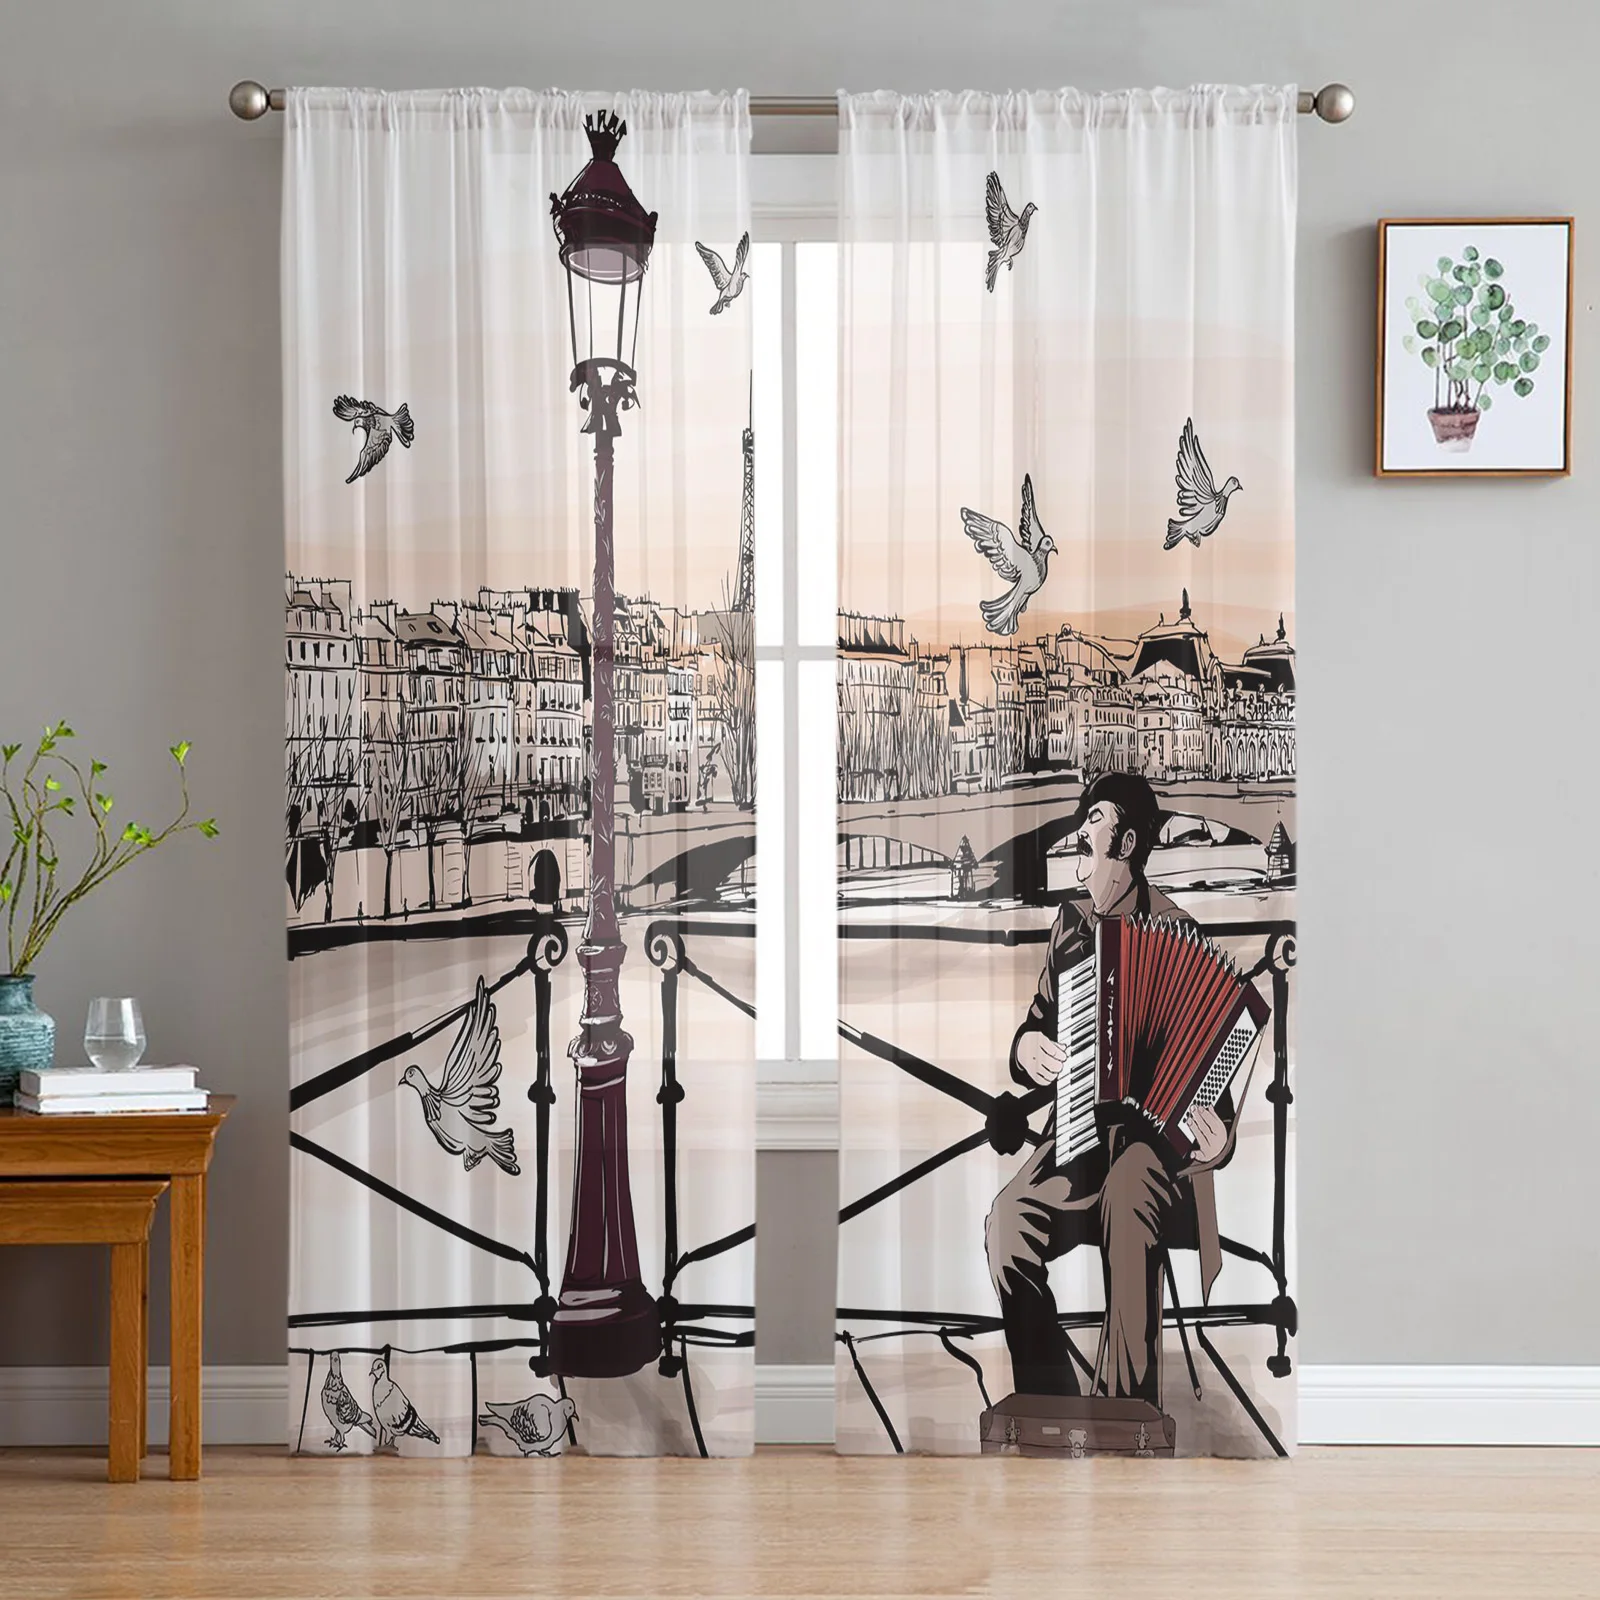 

Accordionist Art Bridge Paris Pigeon France Tulle Curtains for Living Room Bedroom Chiffon Sheer Voile Kitchen Window Curtain